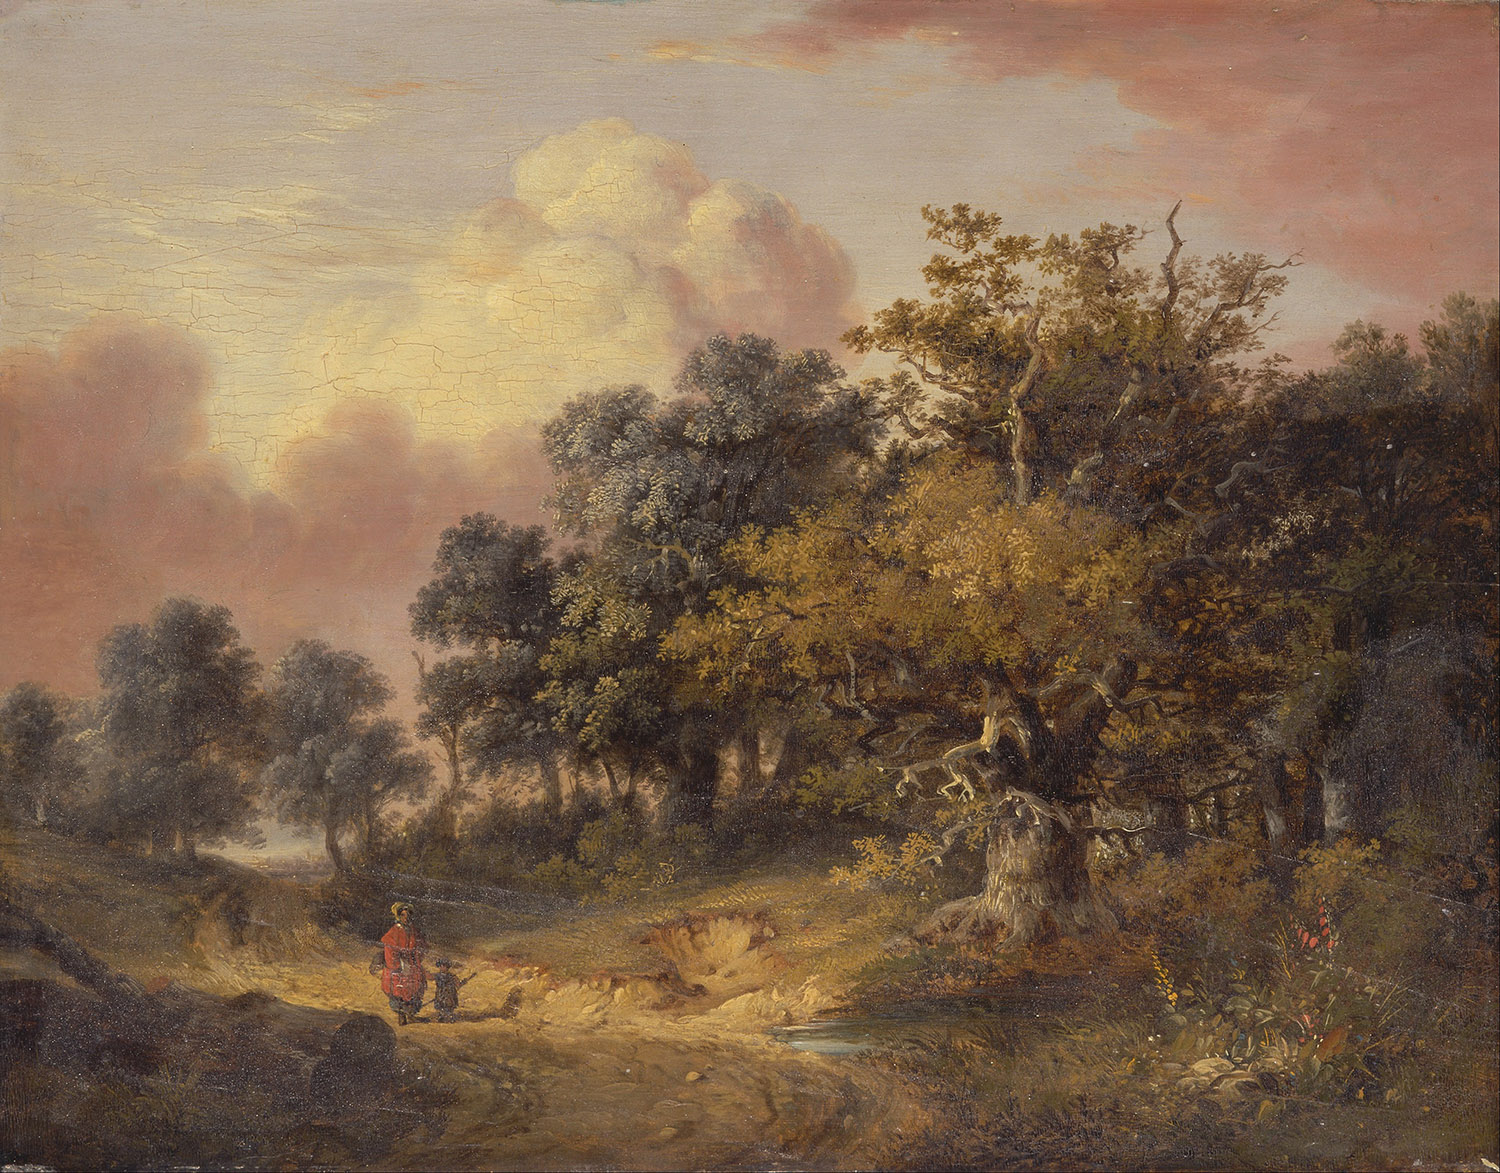 Wooded Landscape with Woman and Child Walking Down a Road, Robert Ladbrooke, c.1820.